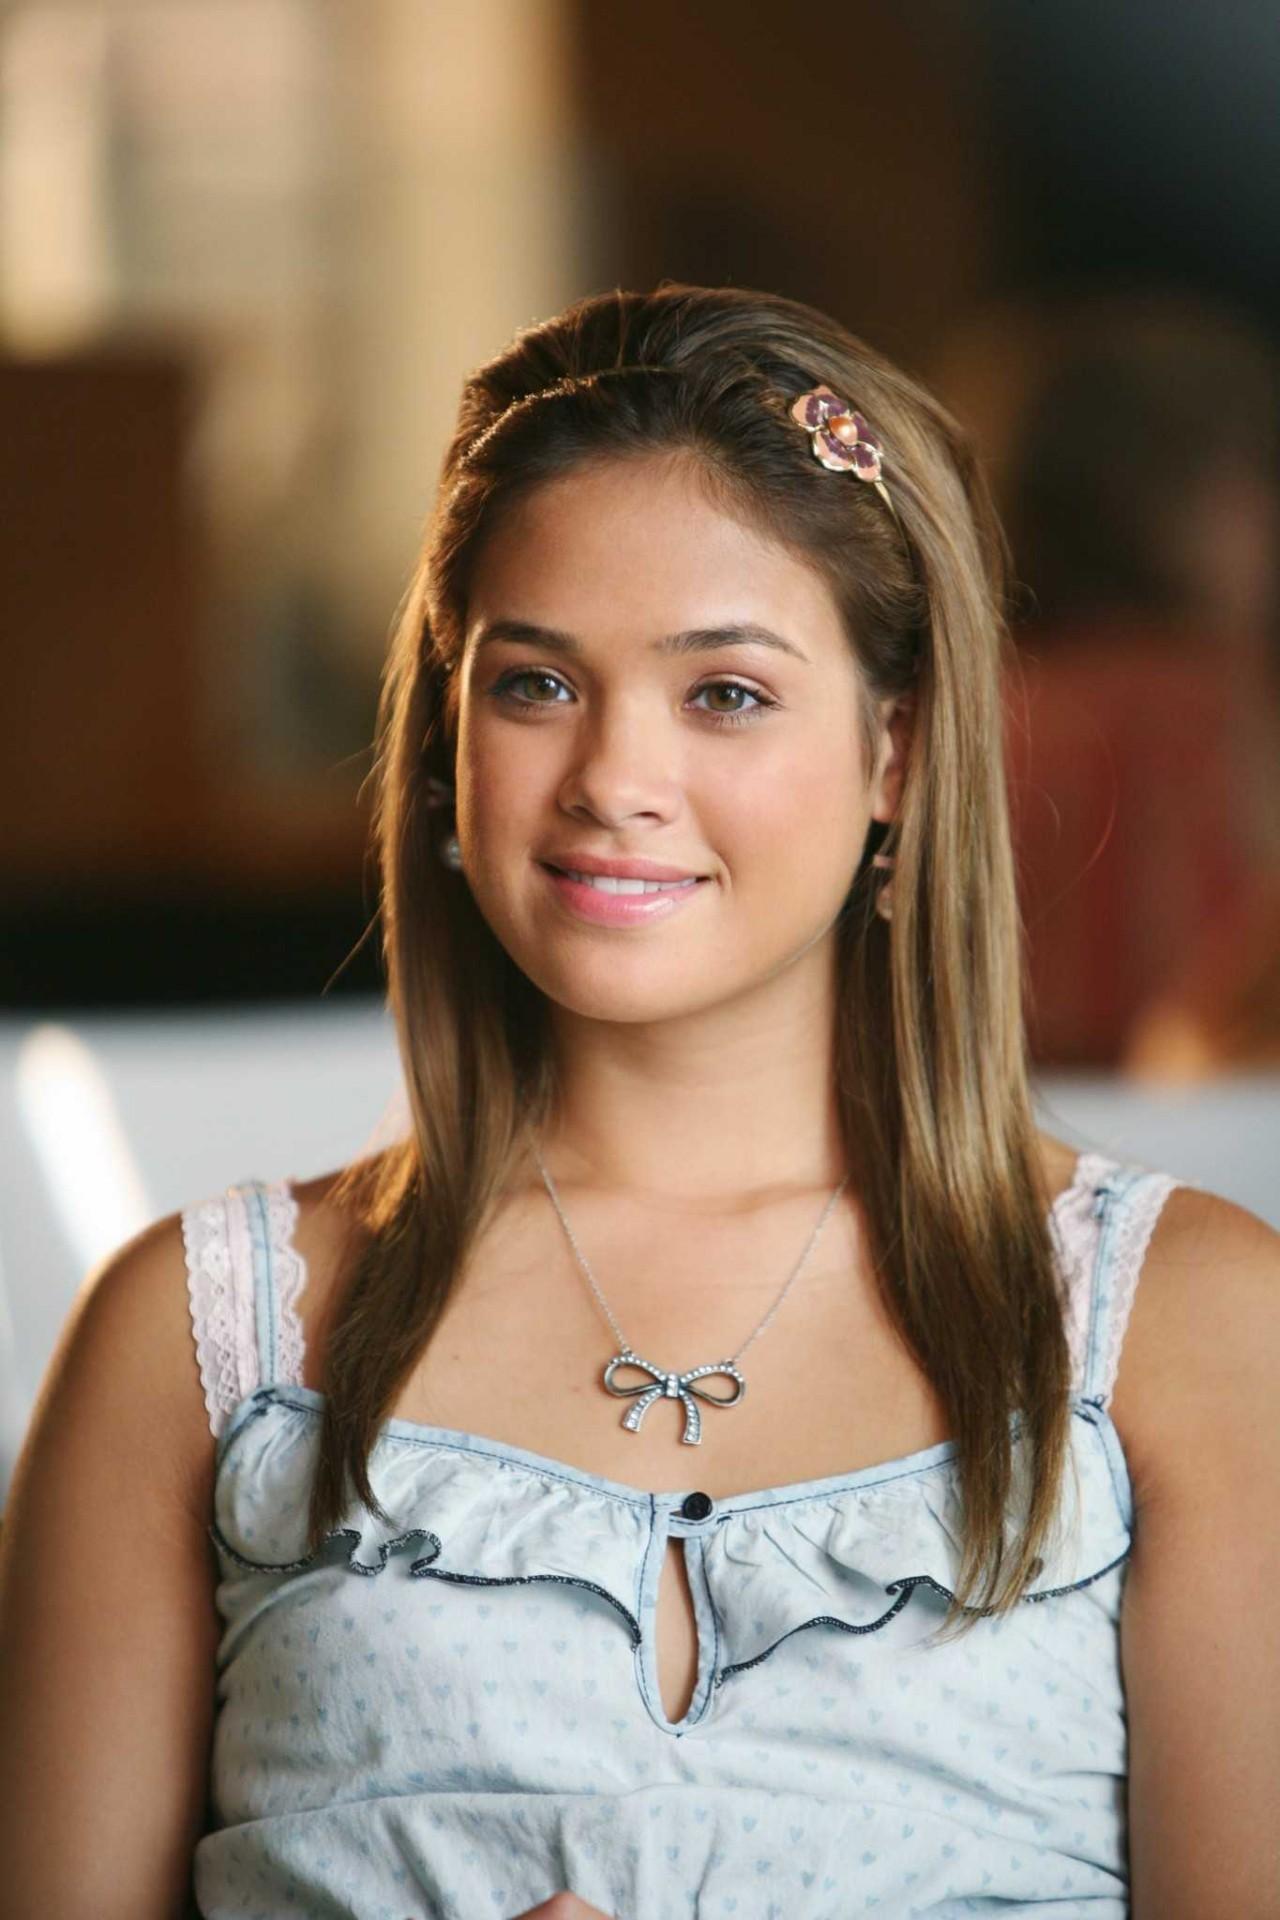 Nicole Gale Anderson Wallpaper Background Image